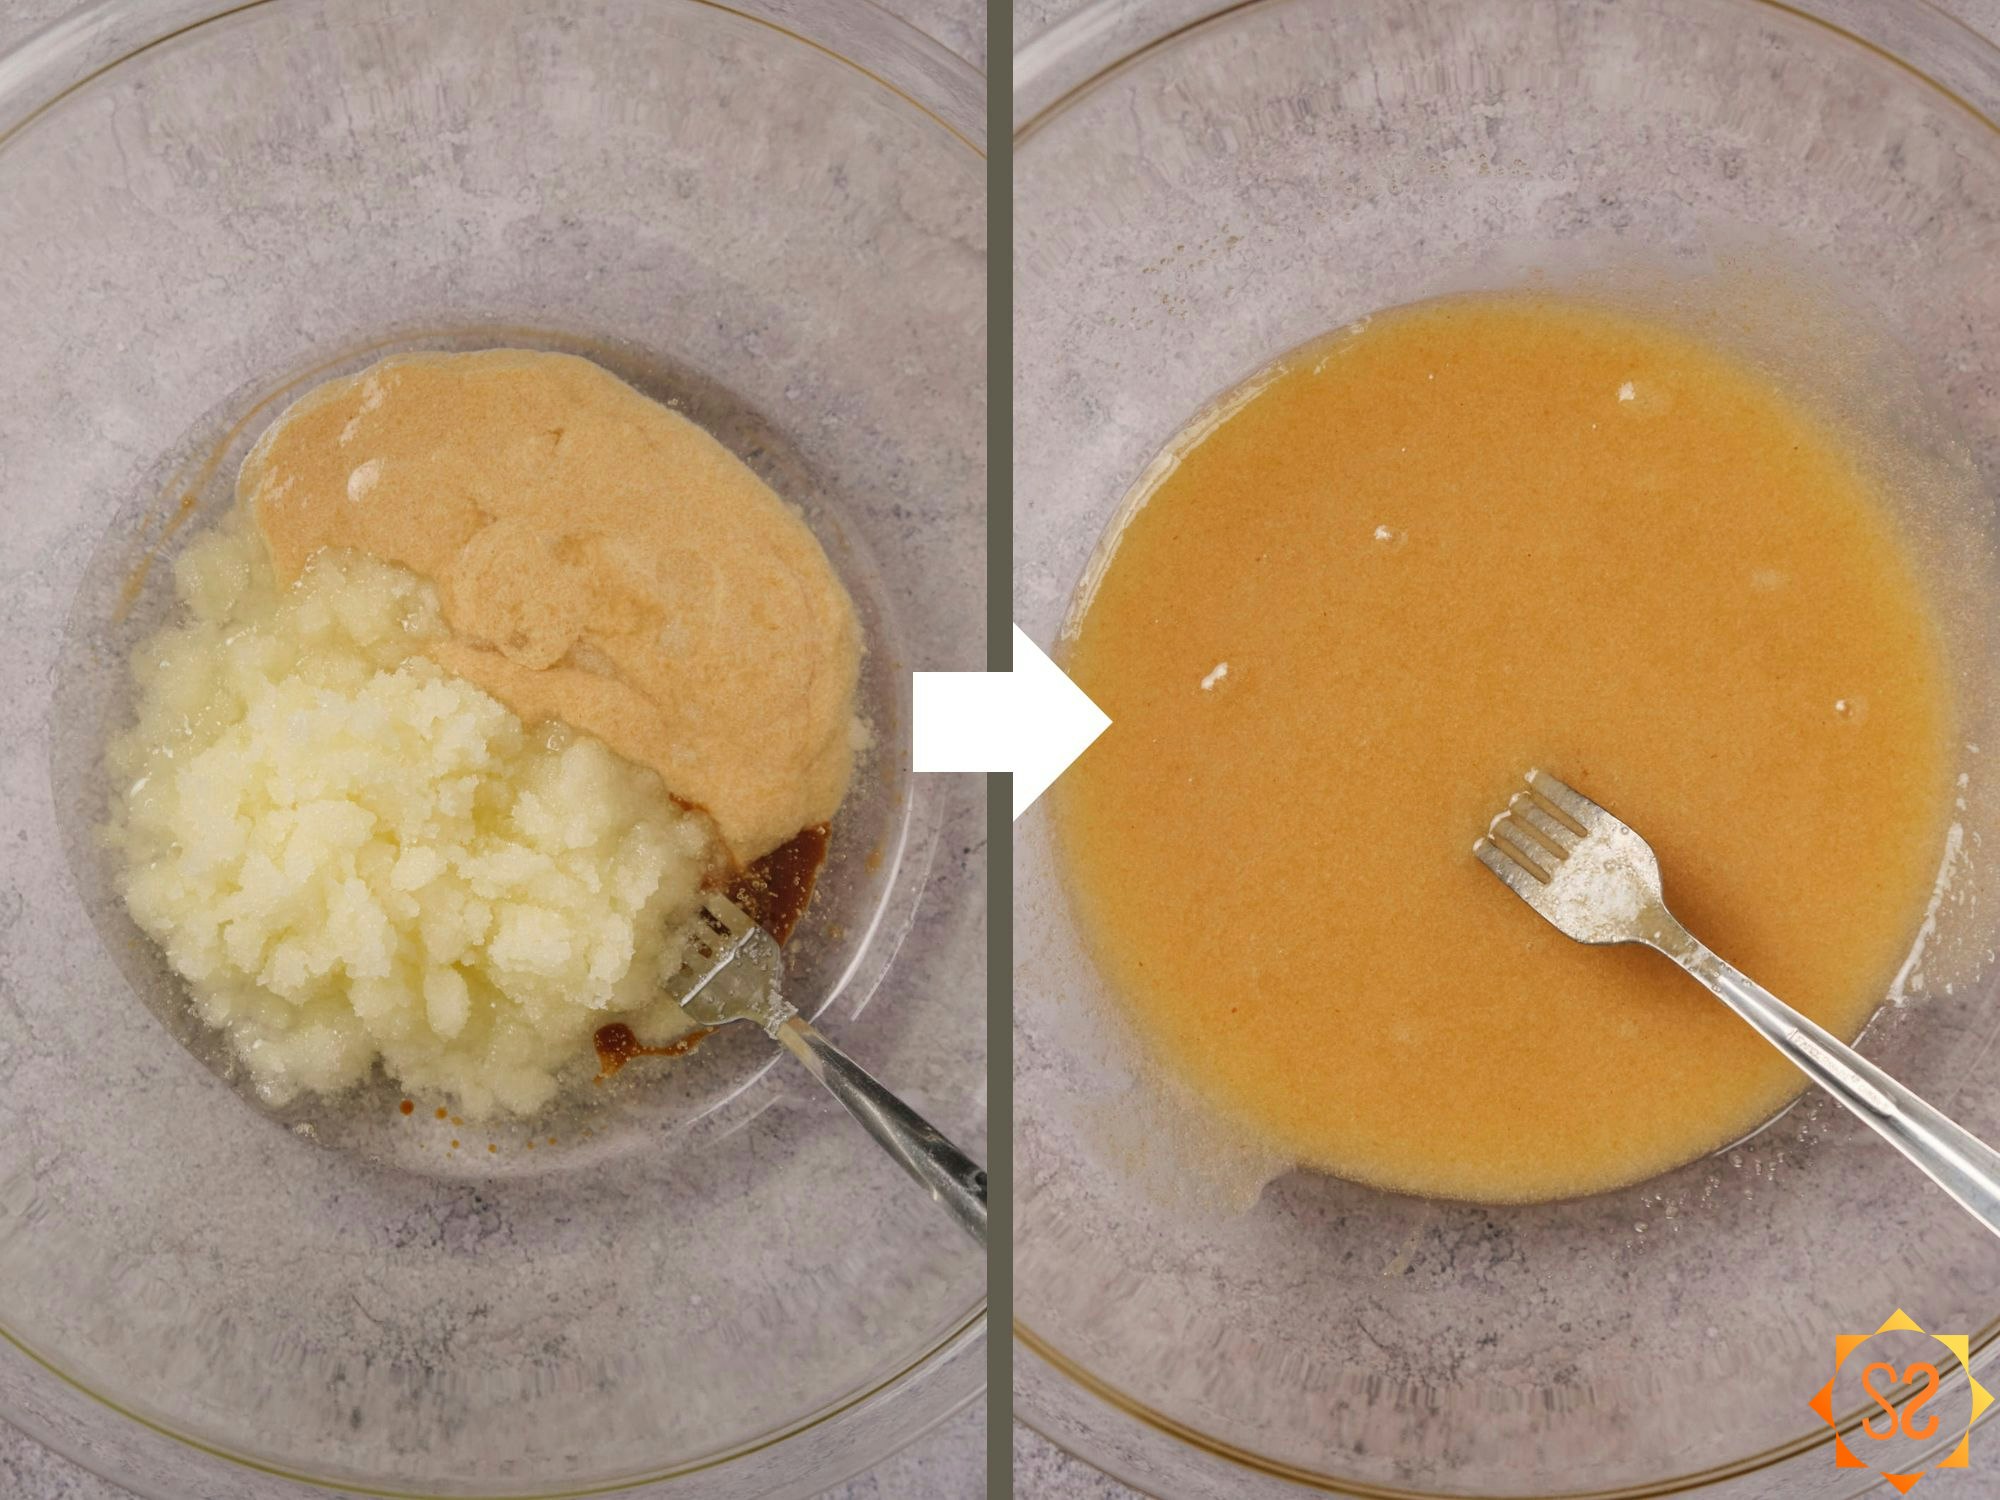 Left: wet ingredients added to a bowl before mixing; right: wet ingredients after mixing.